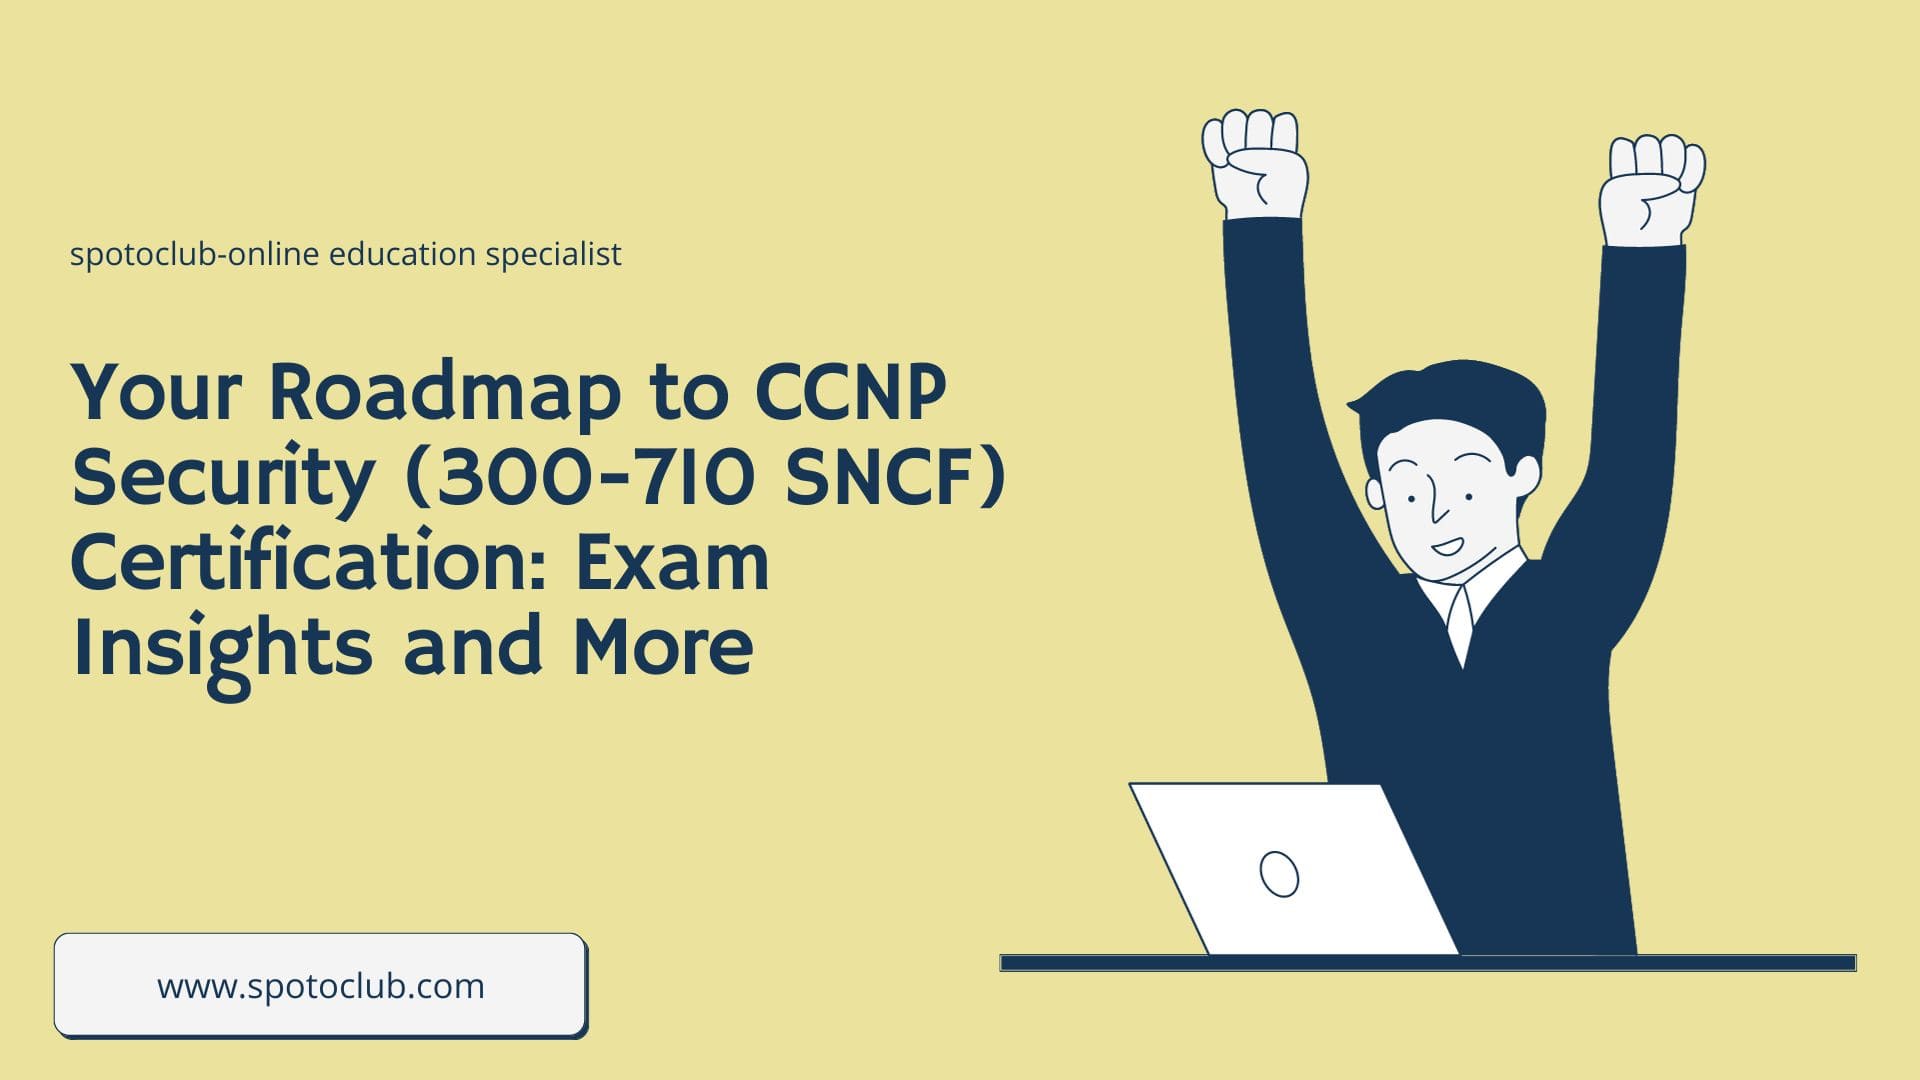 (300-710 SNCF) Certification: Exam Insights and More